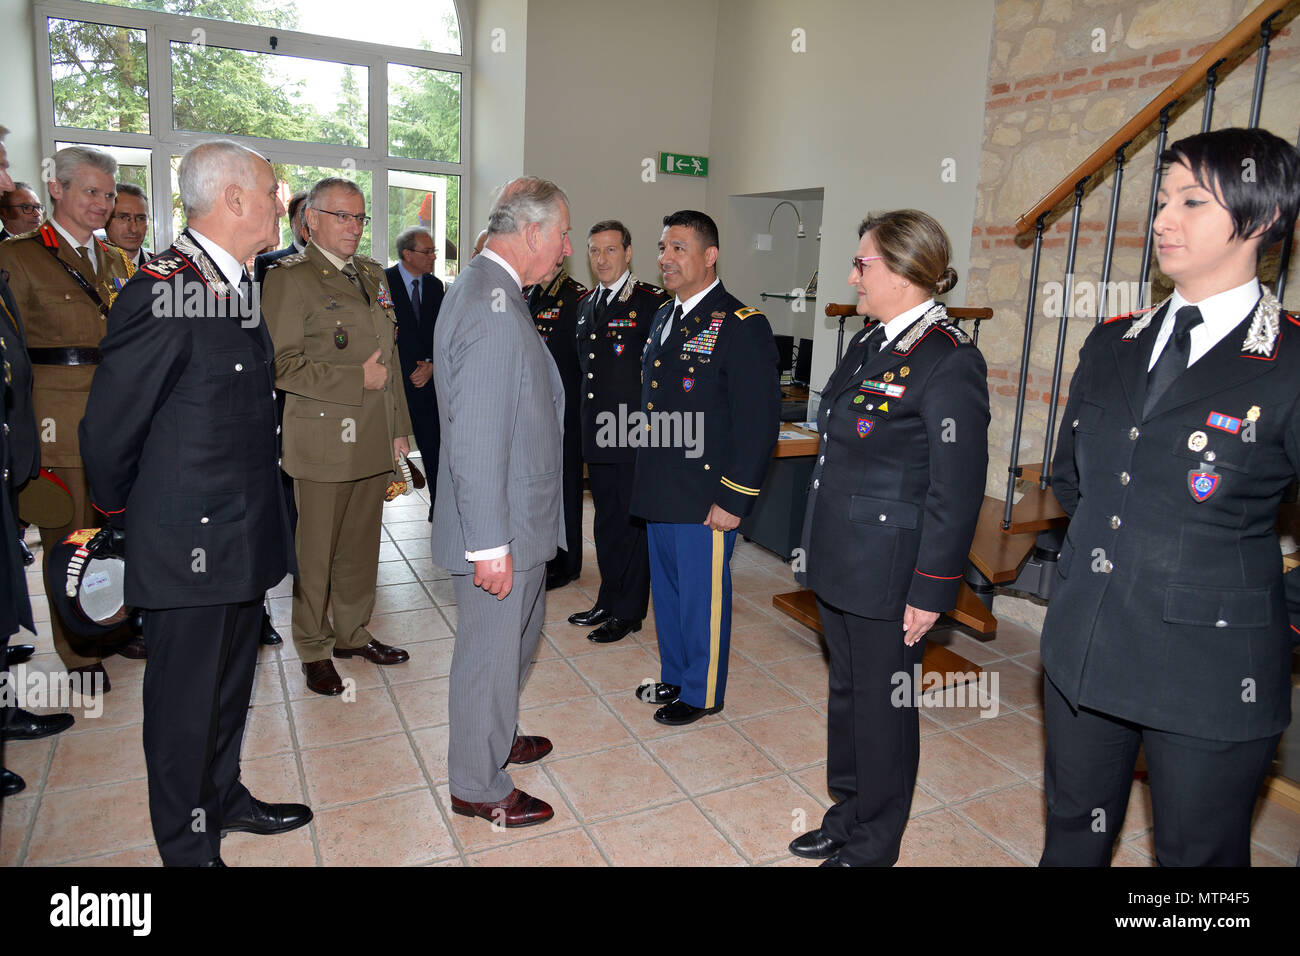 His Royal Highness, Prince Charles, Prince of Wales, meets U.S. Army Col. Darius S. Gallegos, CoESPU deputy director, during visit at Center of Excellence for Stability Police Units (CoESPU) Vicenza, Italy, April 1, 2017. (U.S. Army Photo by Visual Information Specialist Paolo Bovo/released) Stock Photo